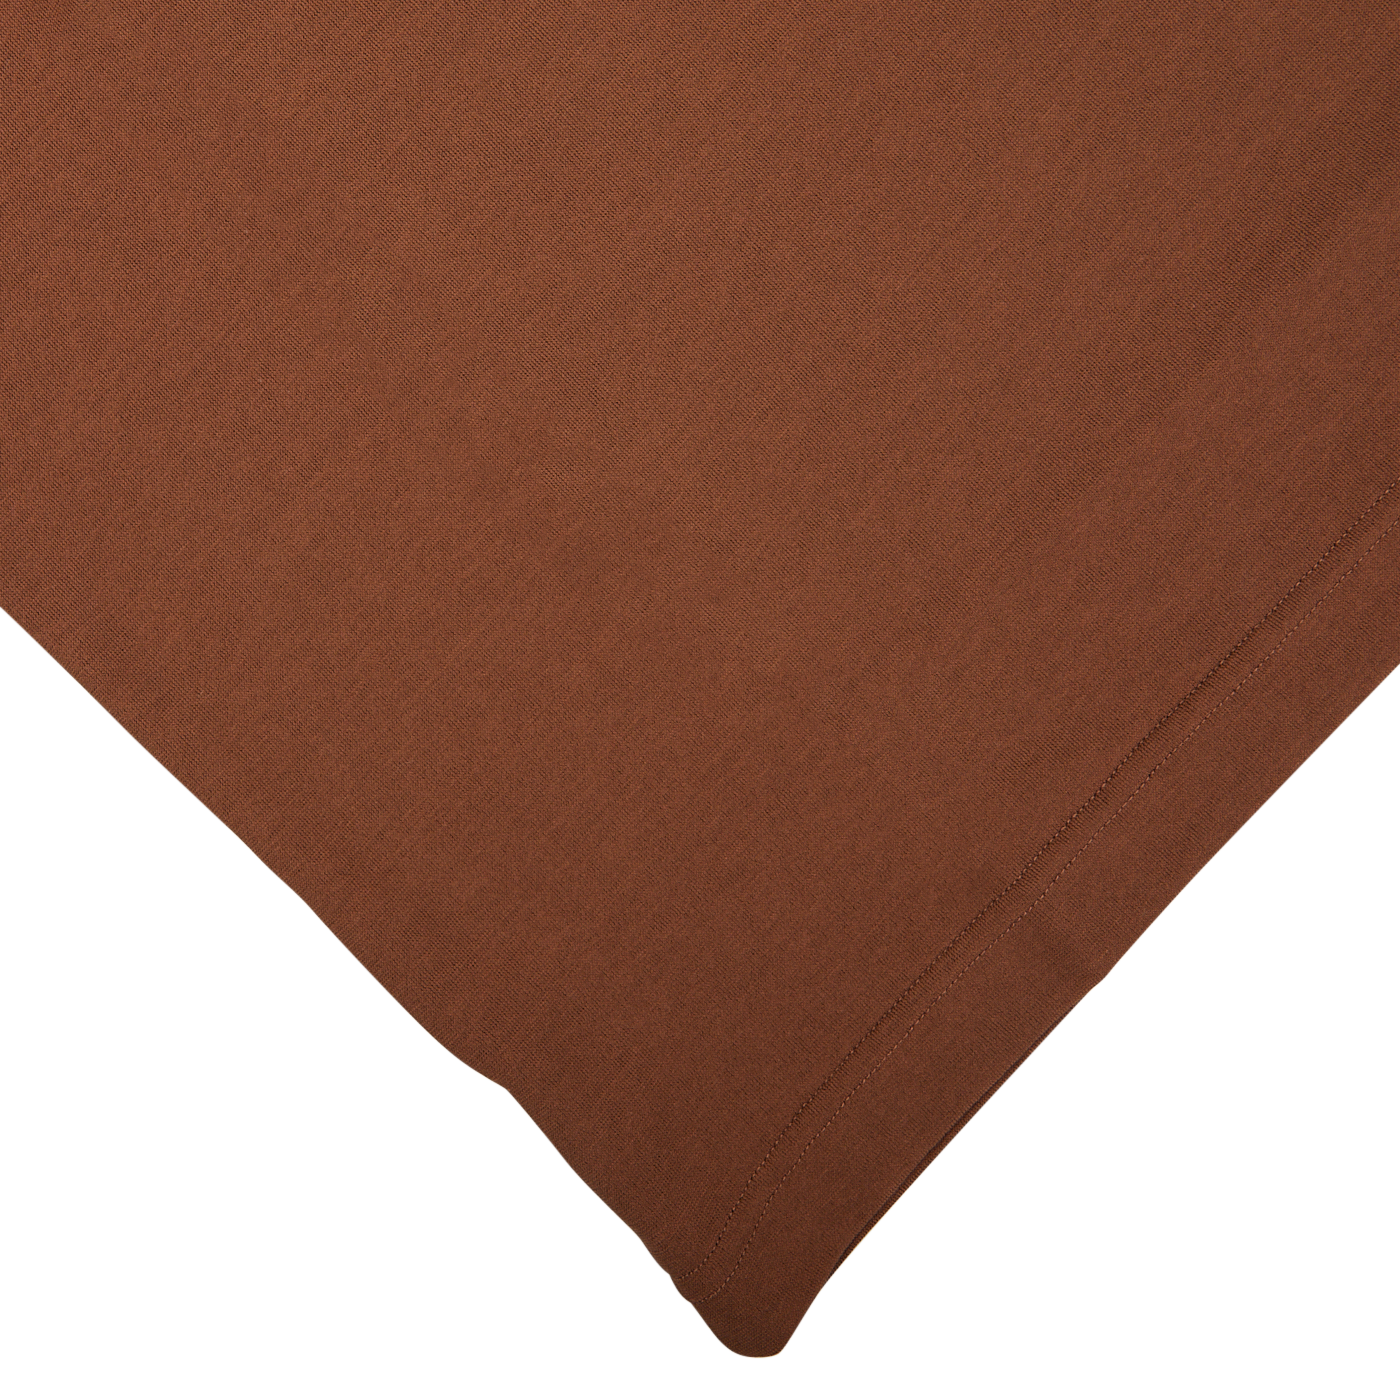 A brown square blanket on a white surface, next to a Zanone Coffee Brown Ice Cotton Polo shirt.